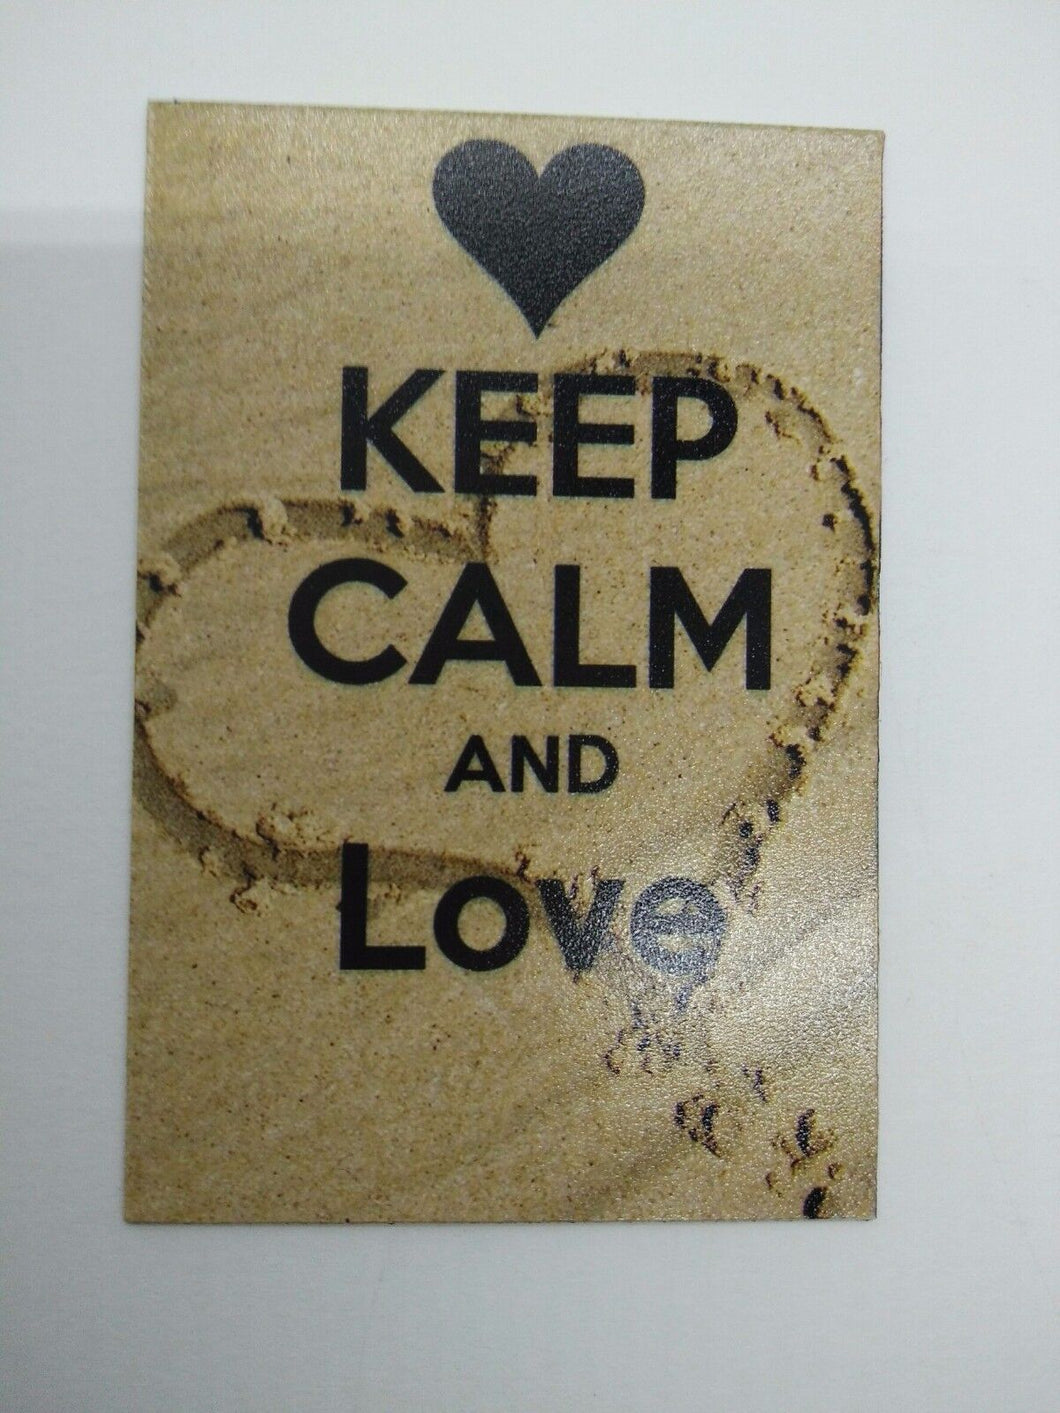 KEEP CALM AND LOVE funny pic Design Vintage Poster Magnet Fridge Collectible